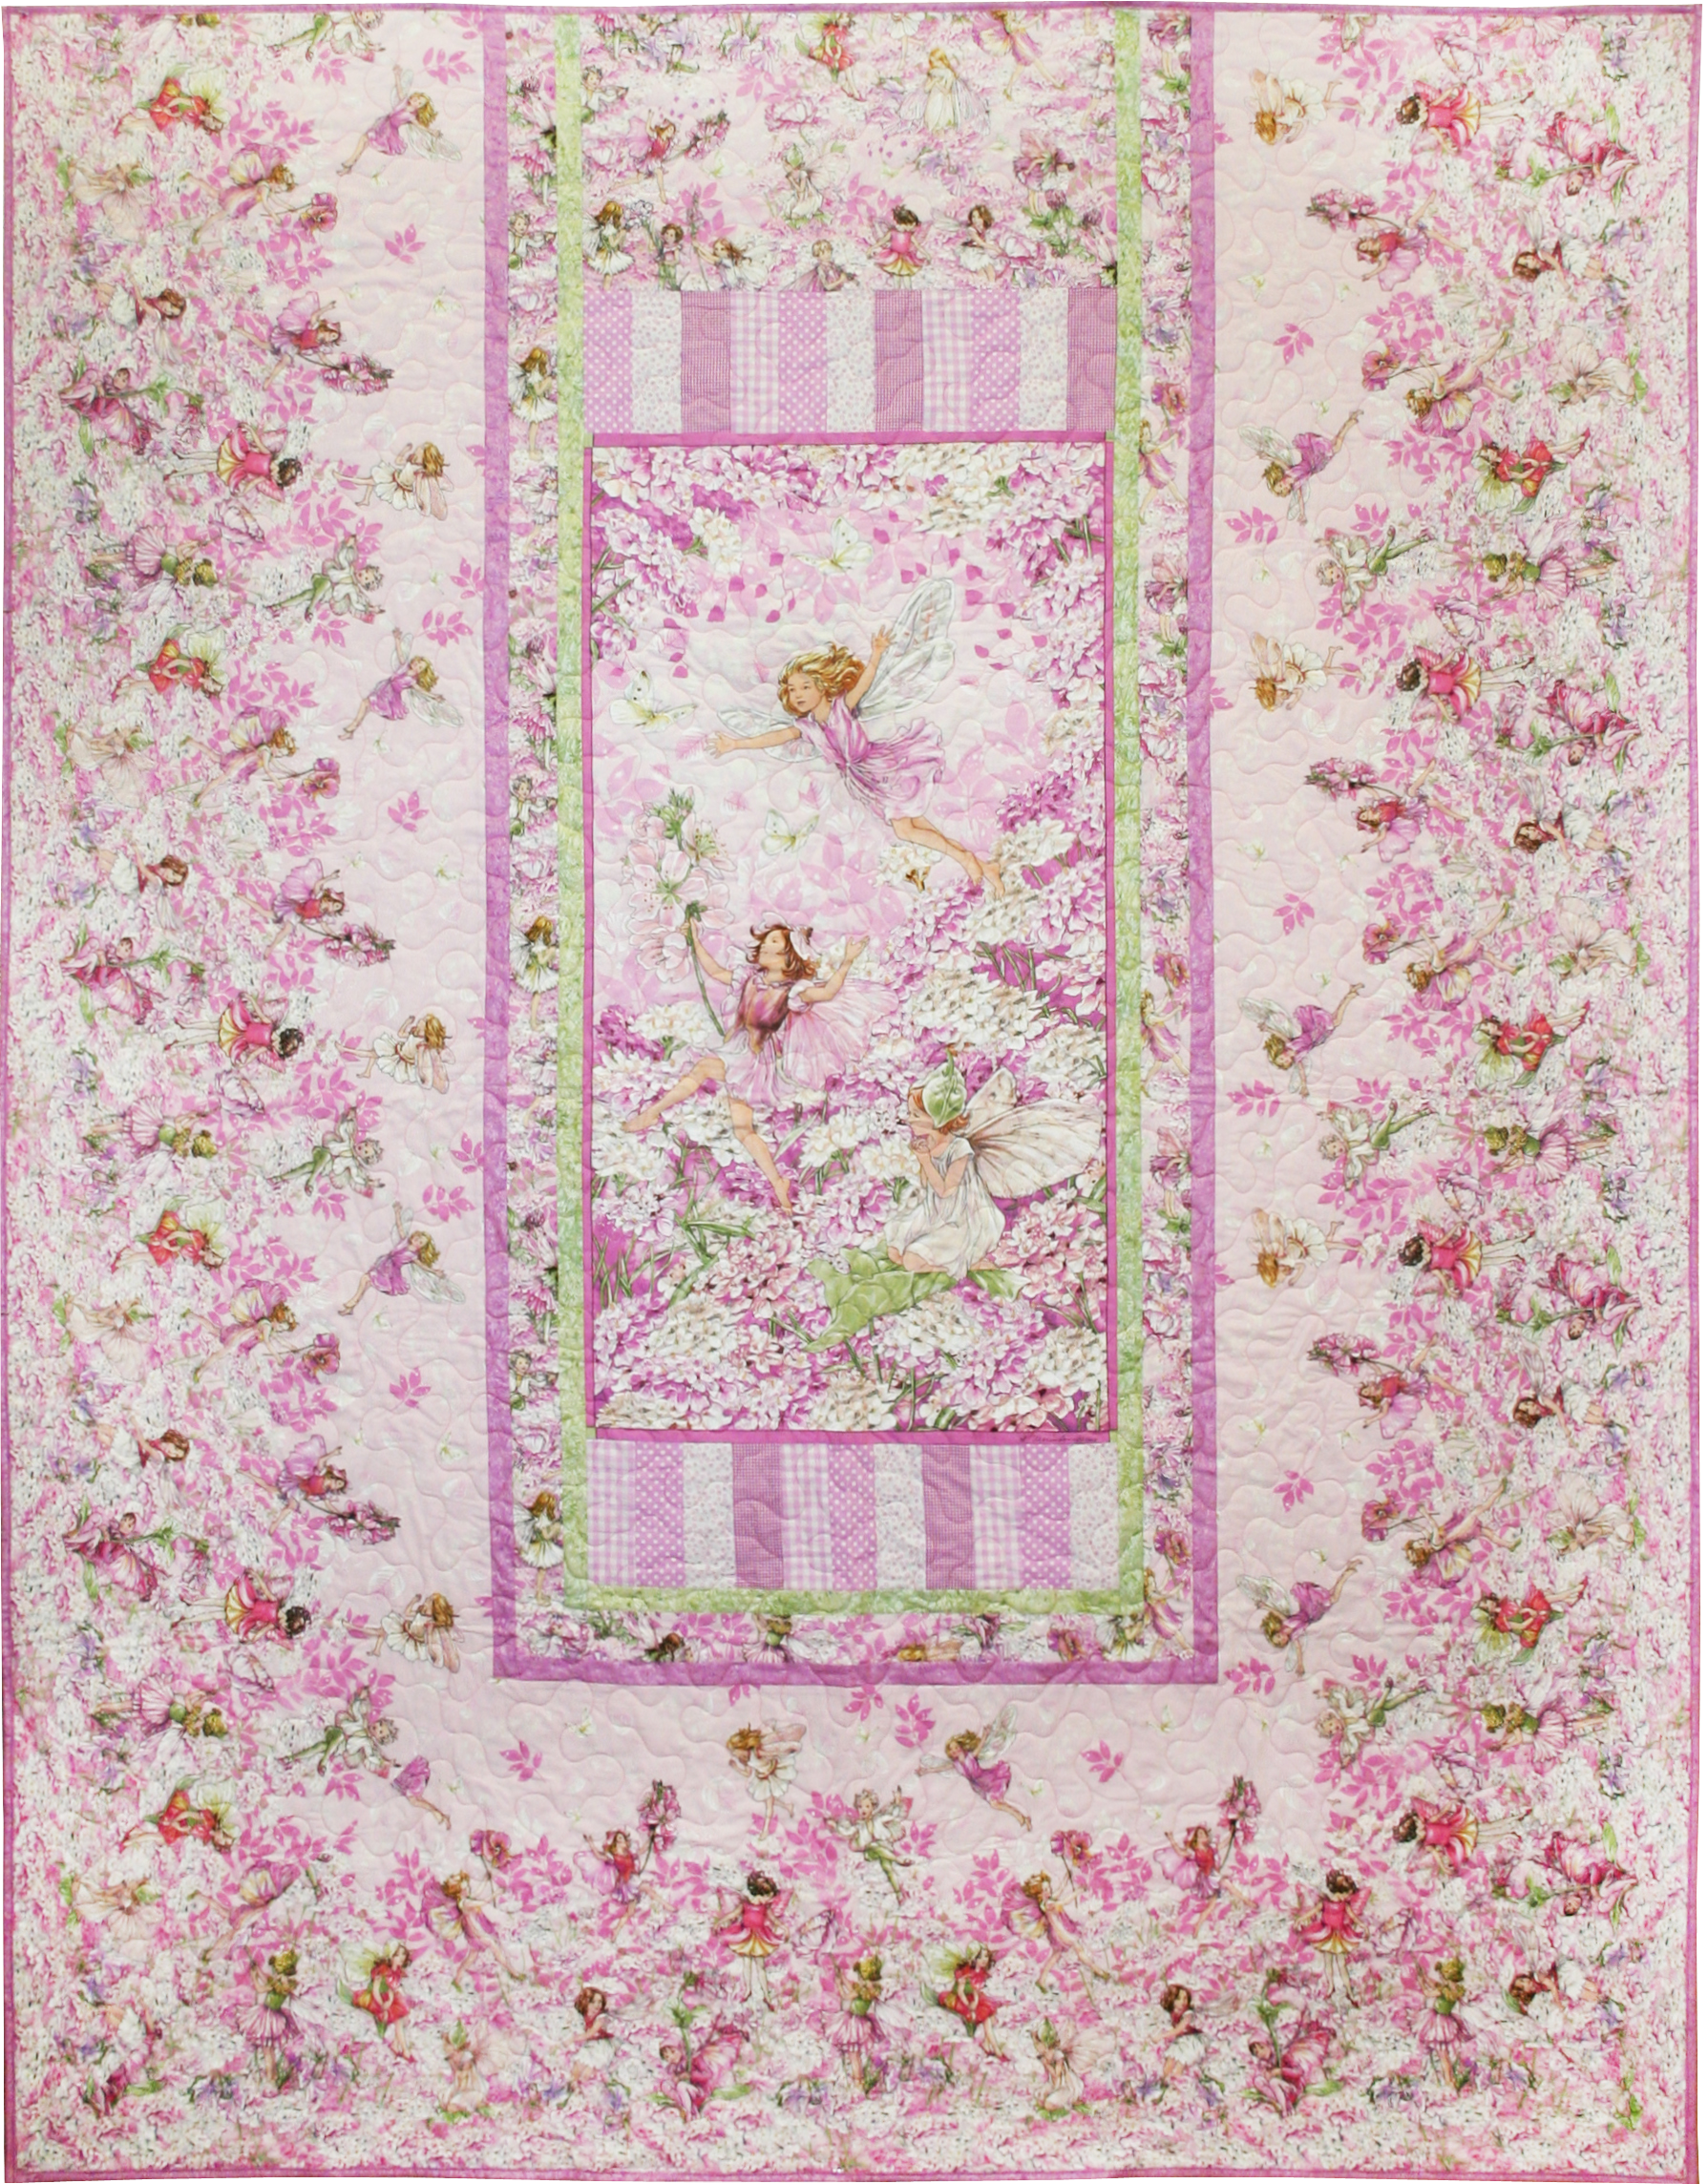 PERIWINKLE FAIRIES Quilt KIT Flower Fairy 3 Fabric Substitutions Free Pattern 